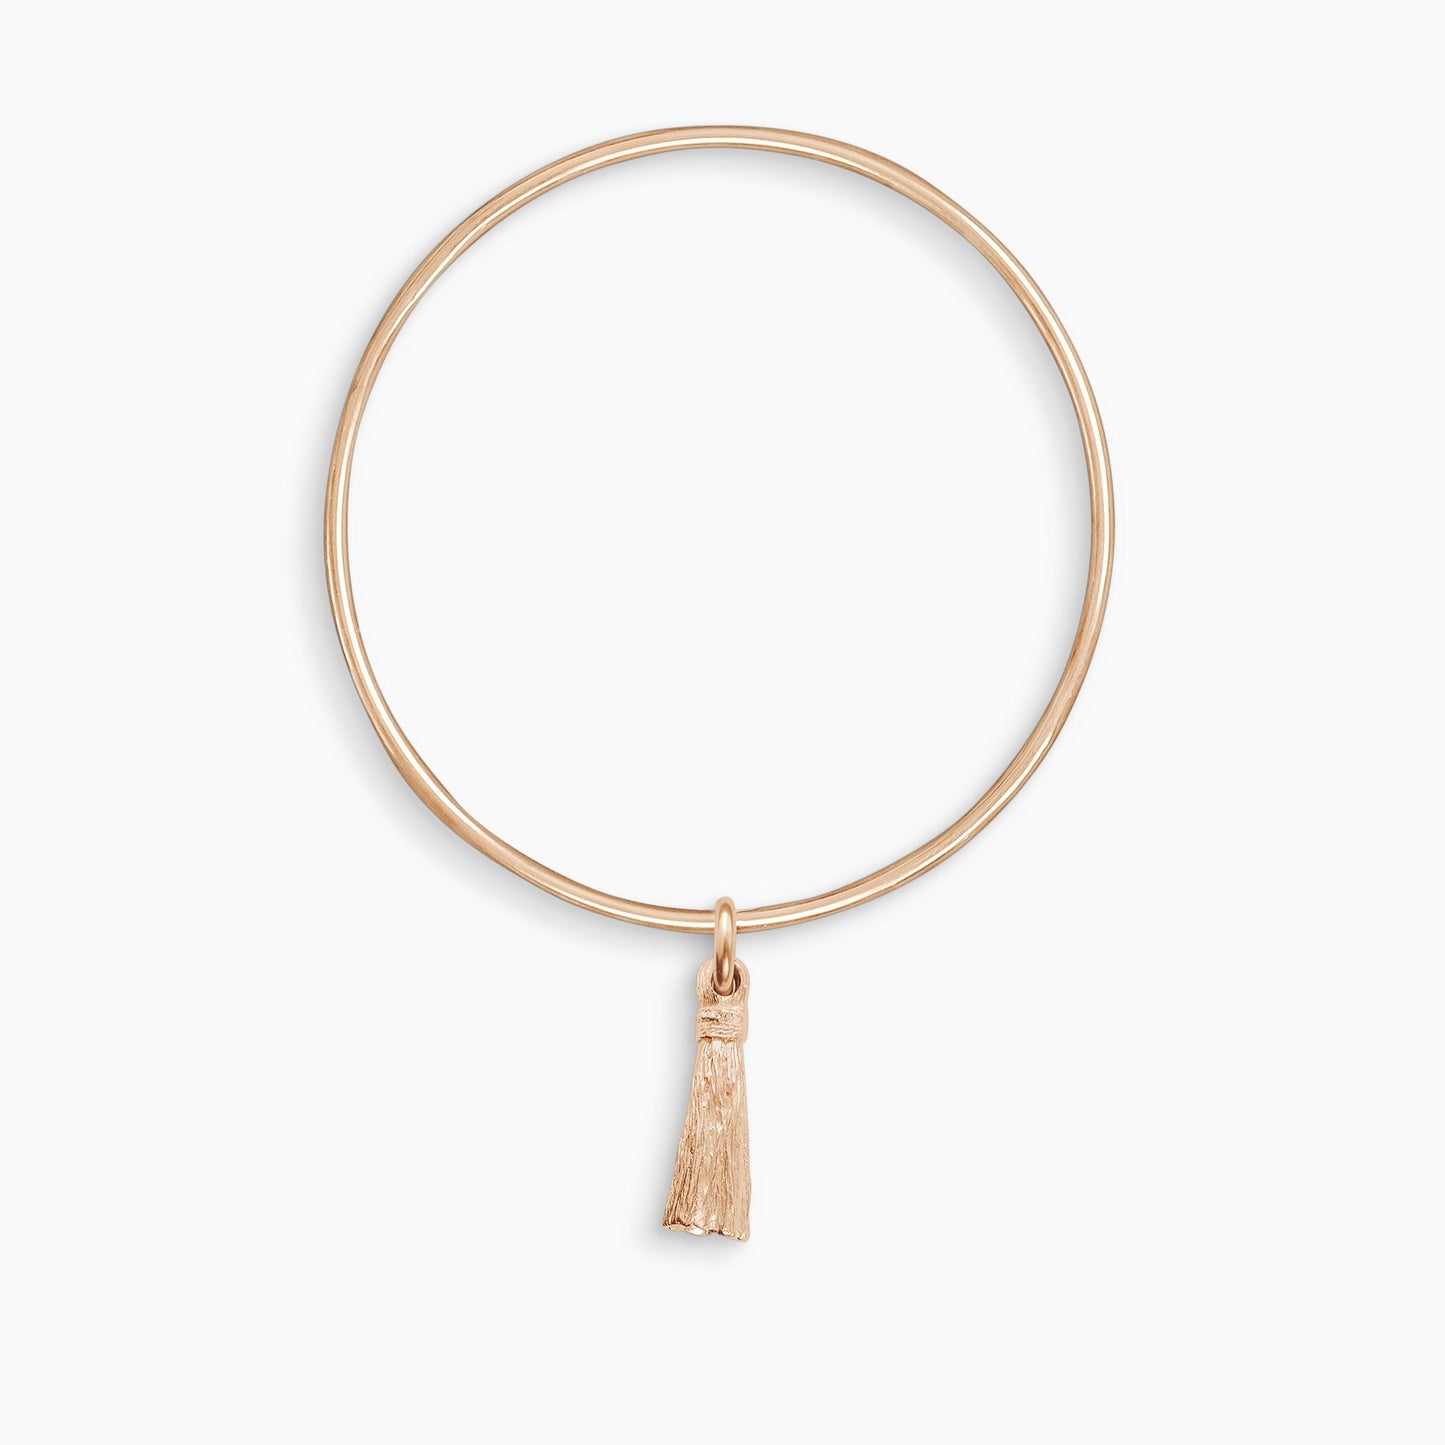 An 18ct Fairtrade rose goldTassel charm, with the texture of an actual tassel, freely moving on a round wire bangle. Charm 25mm. Bangle 63mm inside diameter x 2mm round wire.